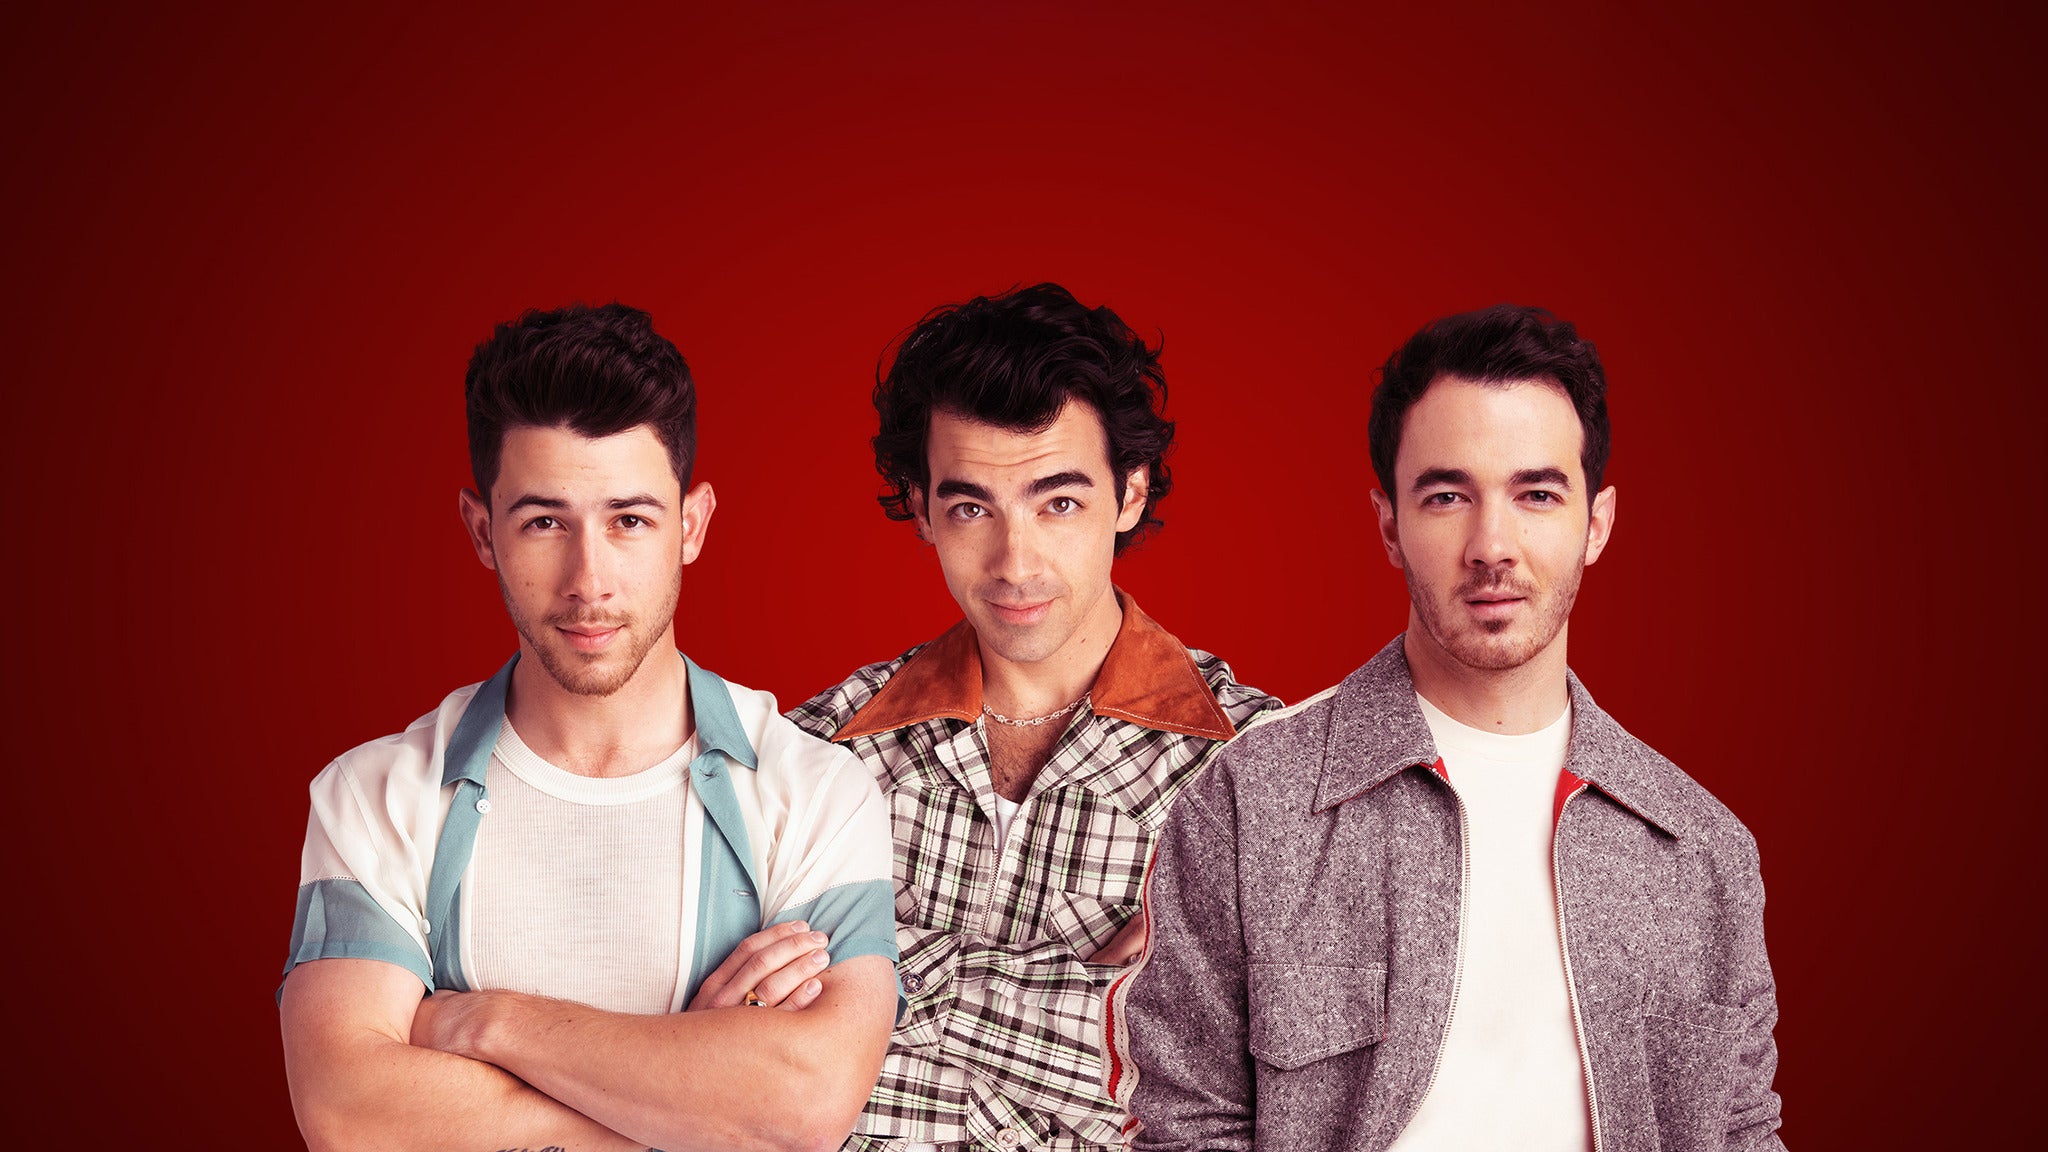 Jonas Brothers - Live in Vegas in Las Vegas promo photo for Official Platinum Onsale presale offer code